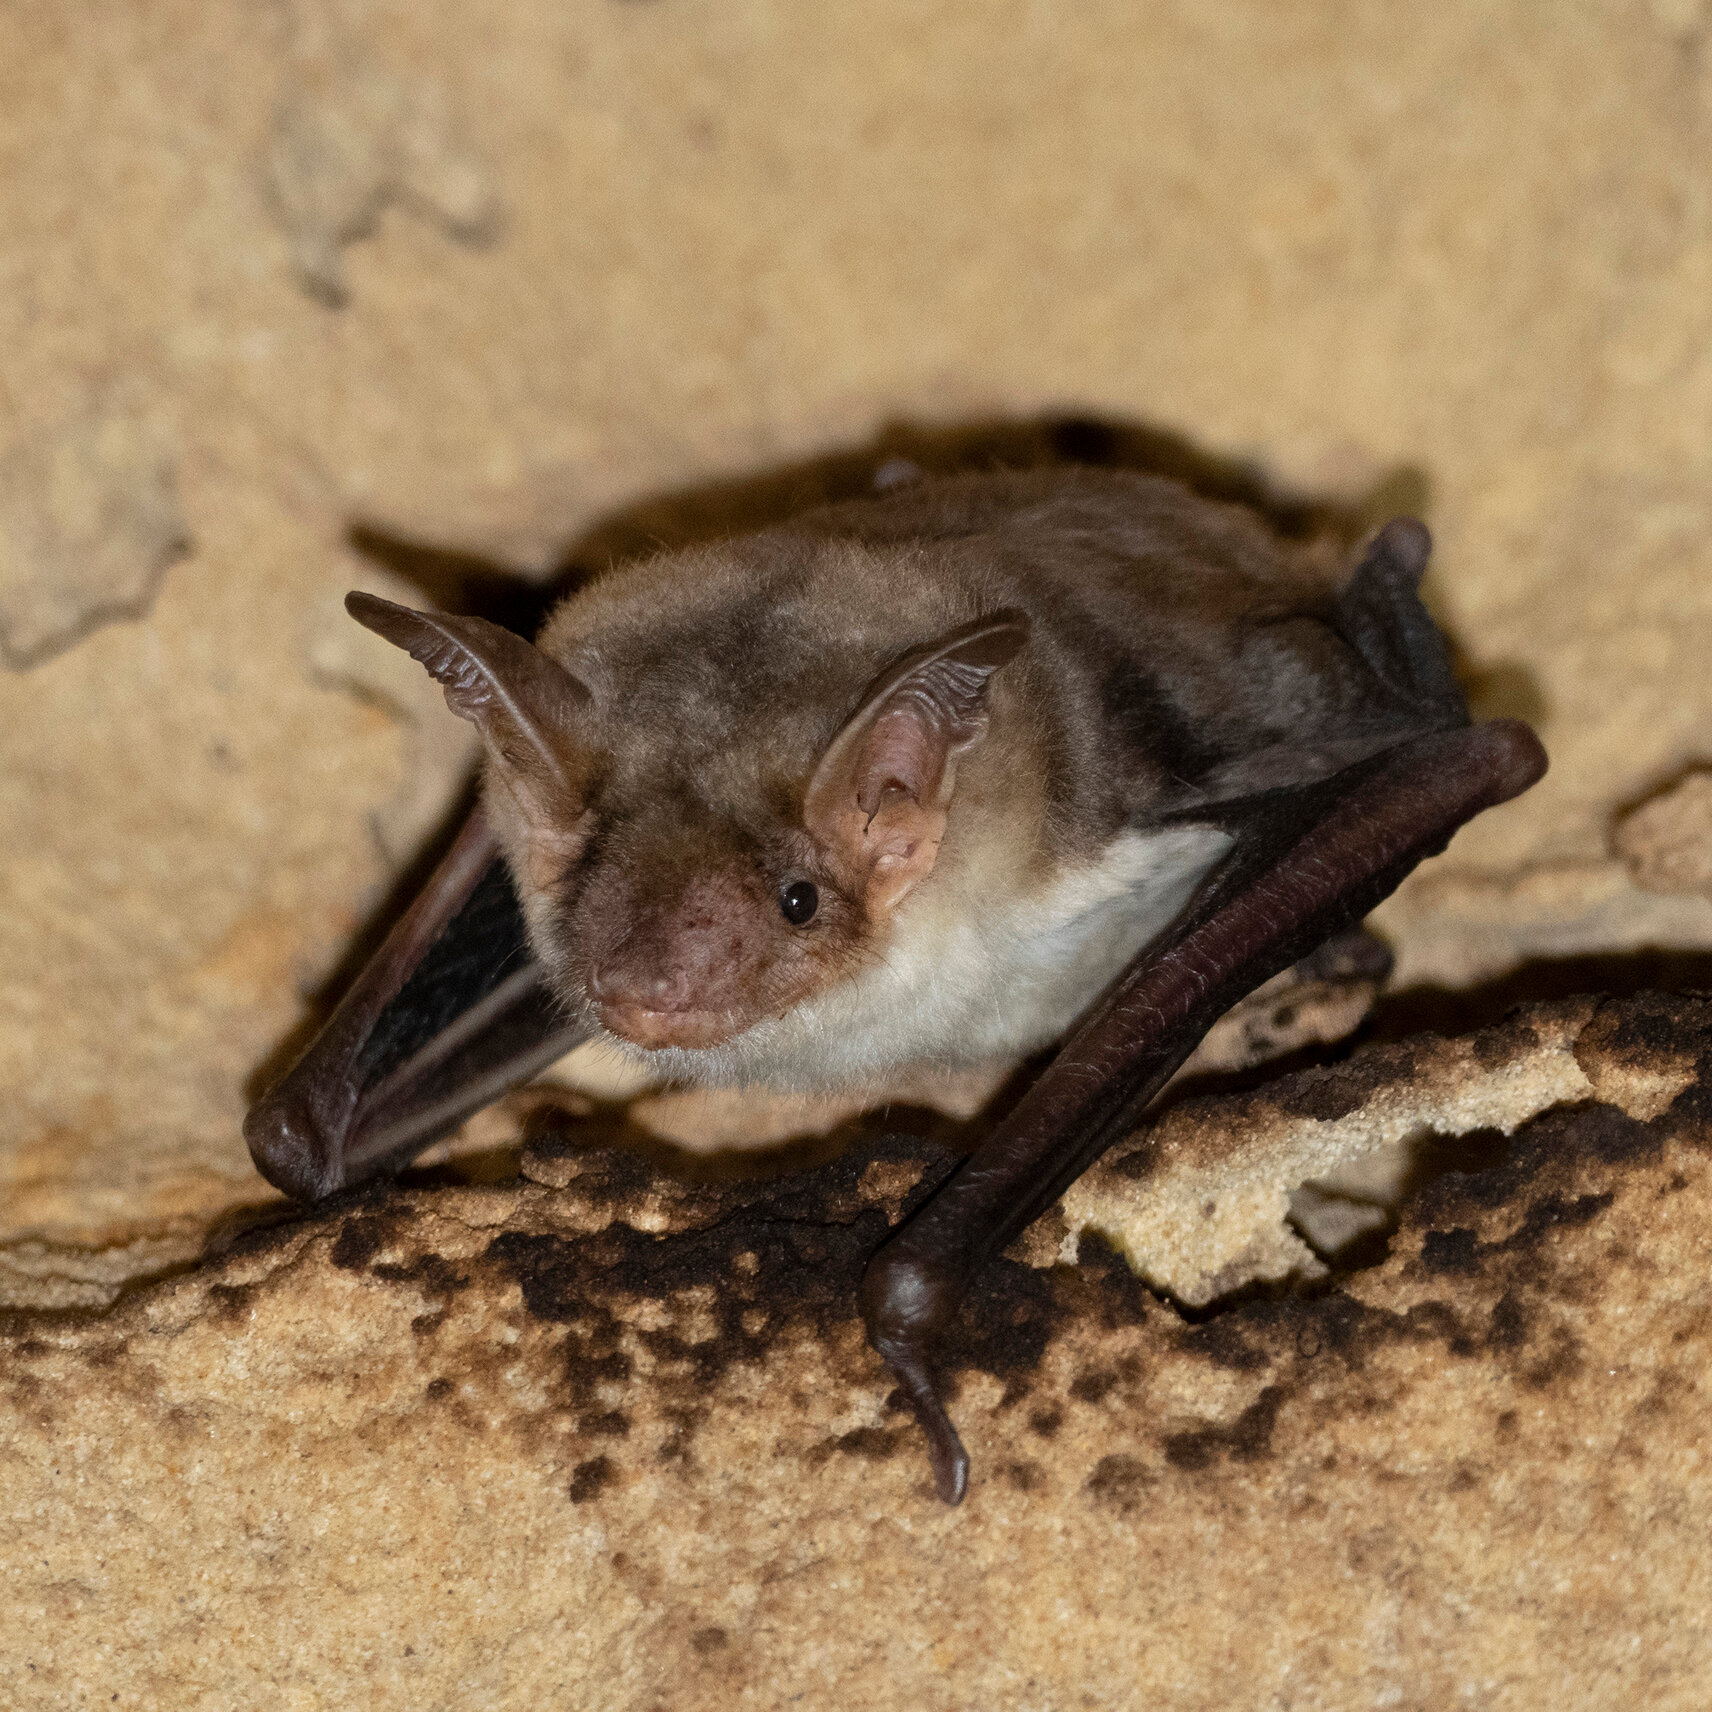 These Bats Buzz Like Hornets to Scare Off Predators